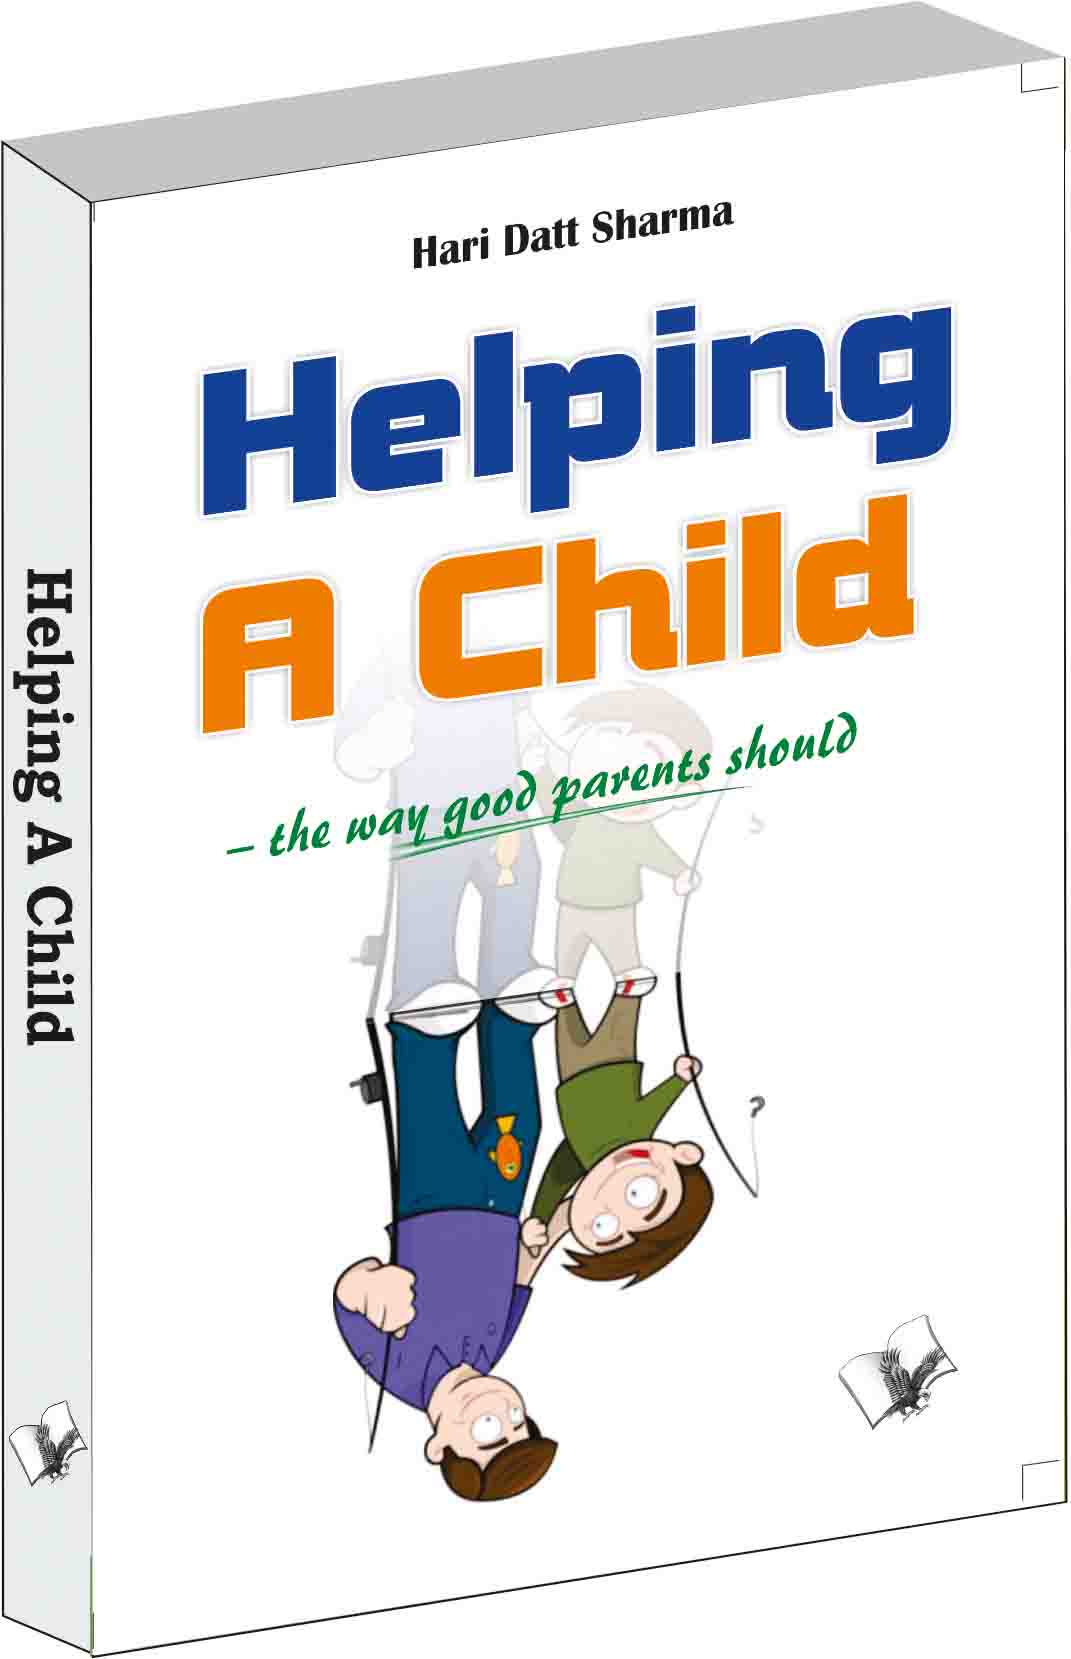 Helping a Child-The way good parents should